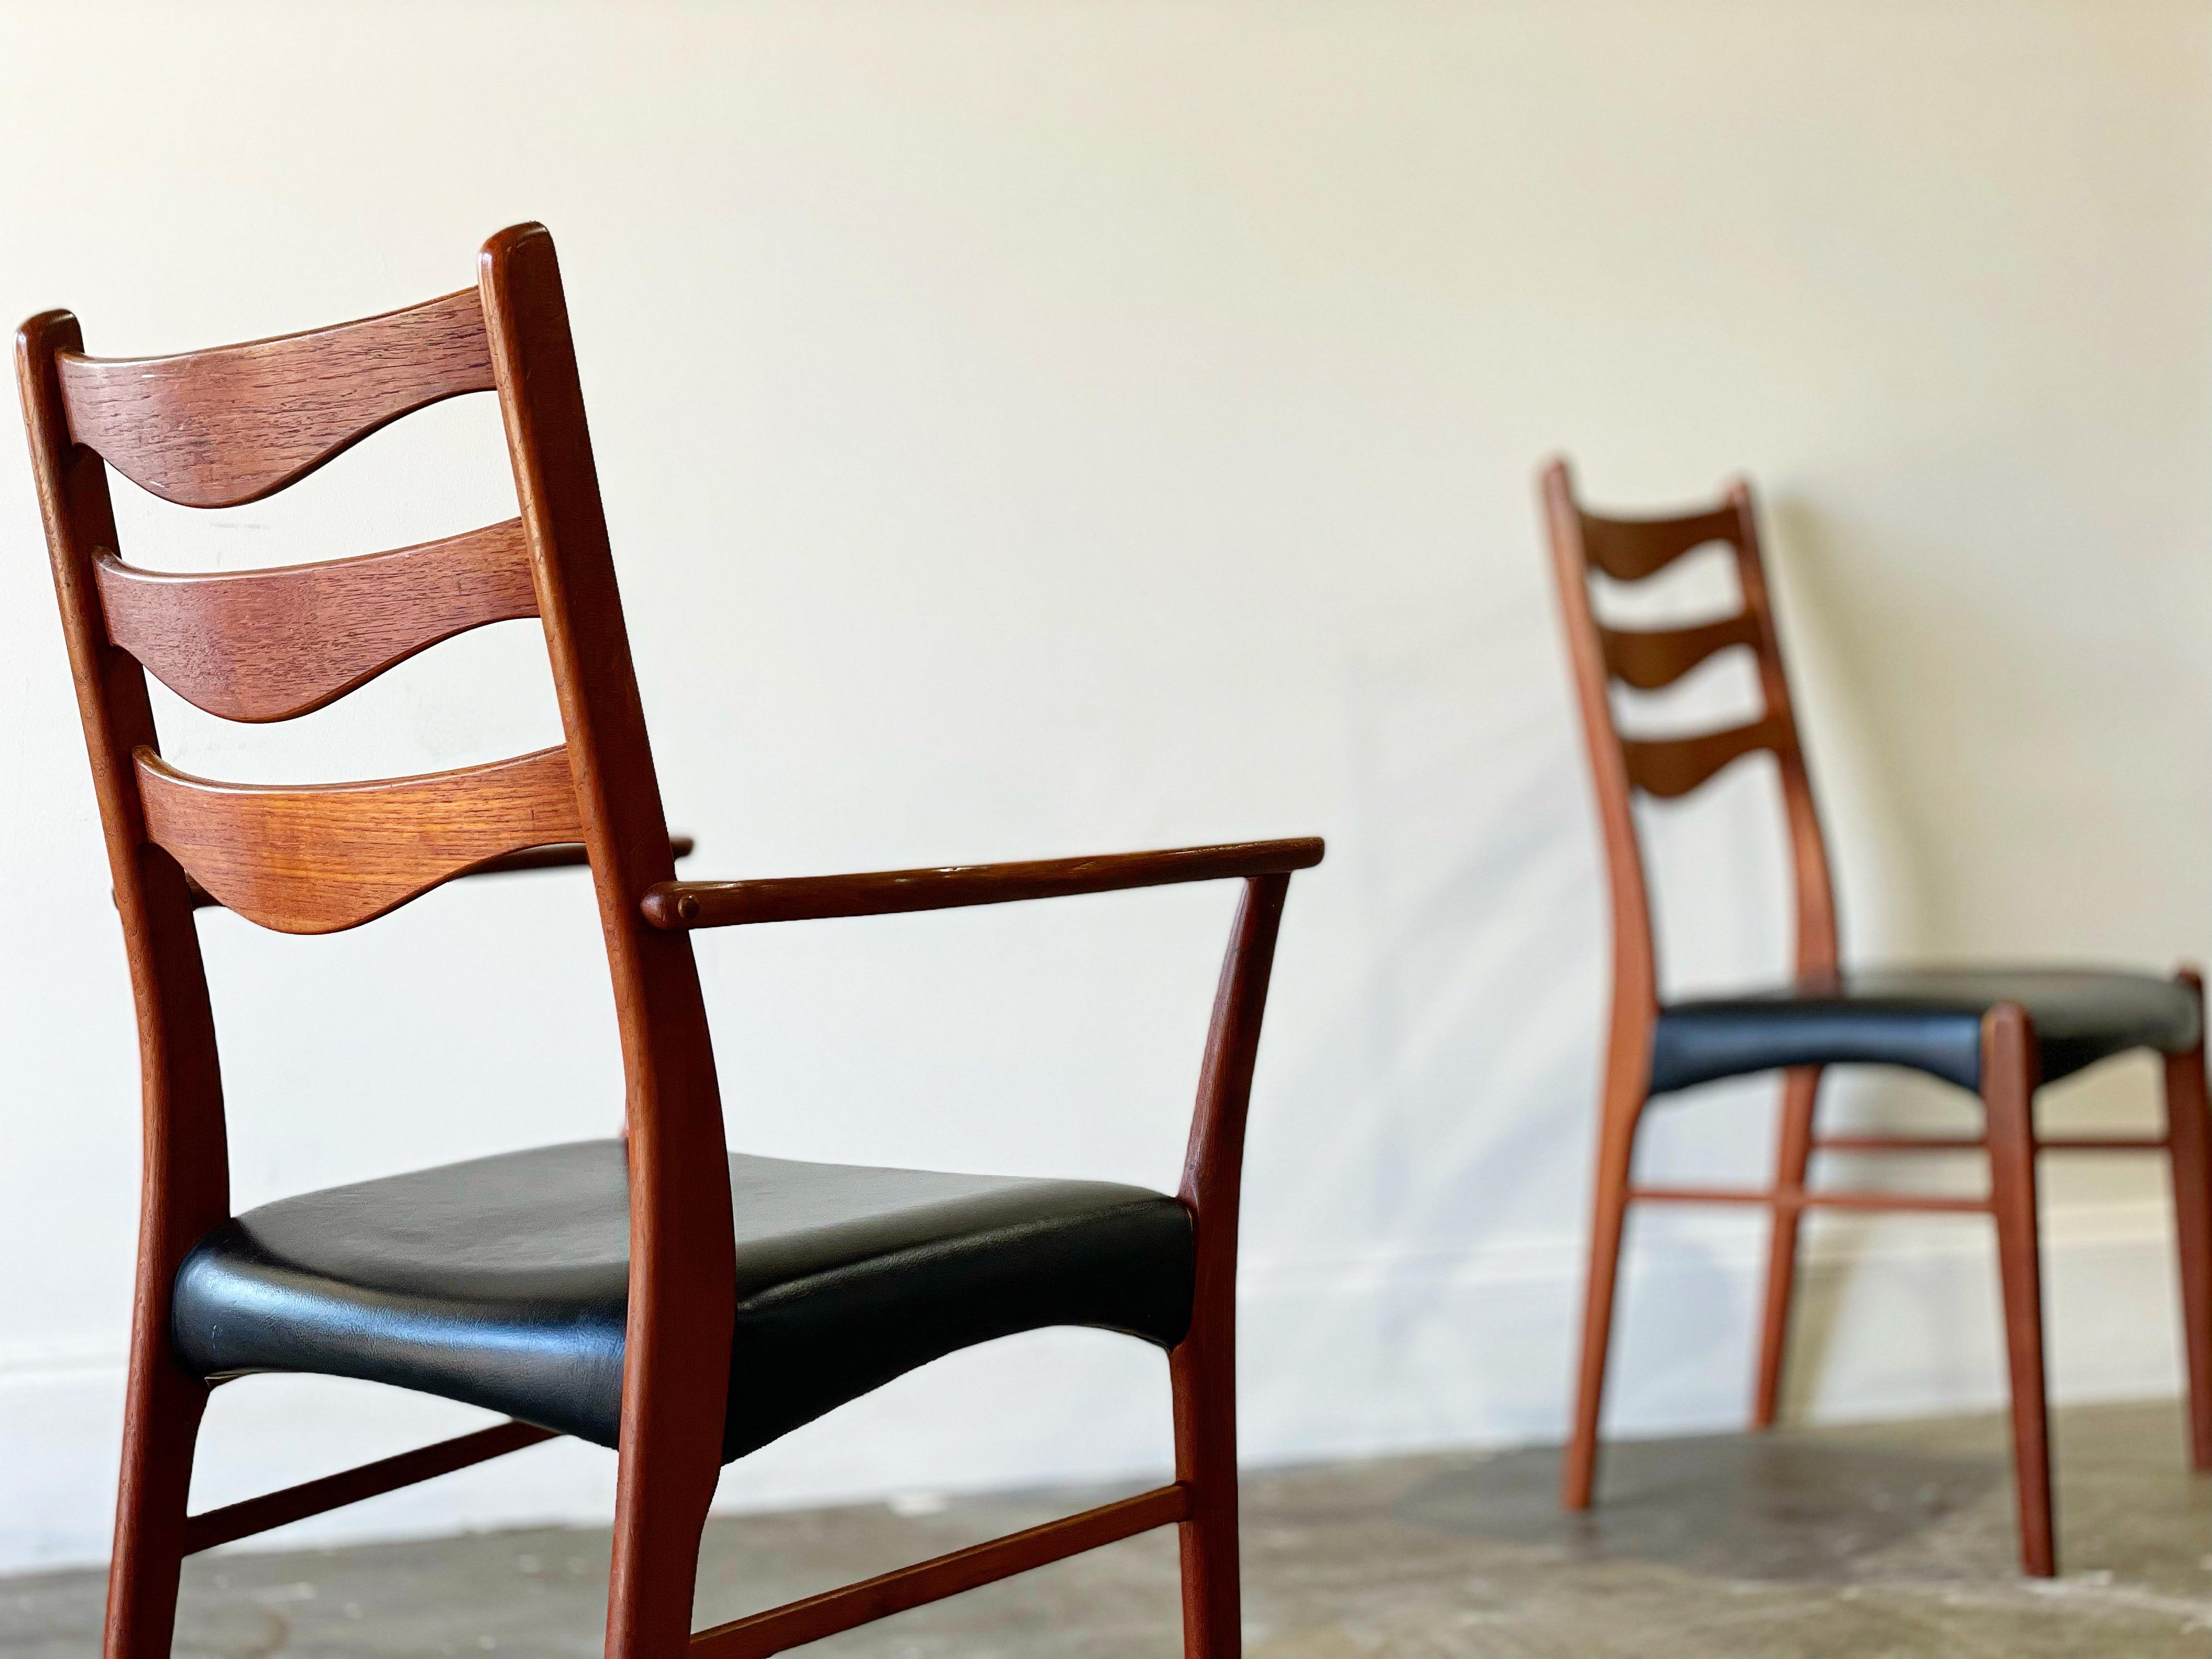 Arne Wahl Iversen for Glyngøre Stolefabrik ladder back dining chairs in teak. 
Set of eight (8)
6 side chairs - 2 arm captains chairs
Solid sculpted teak + black naugahyde

Attended to by our team of in-house craftspeople - the frames have been